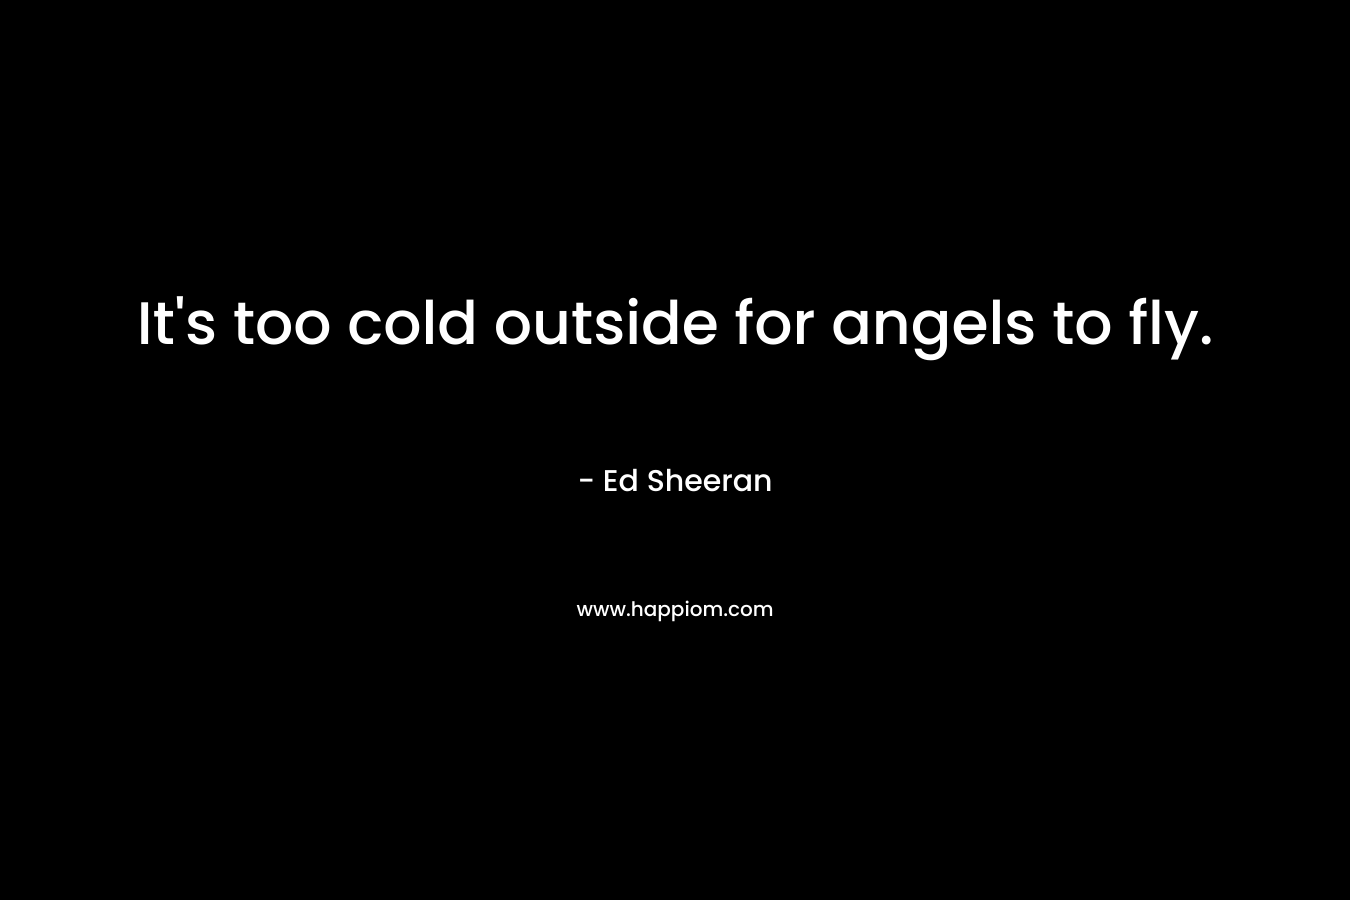 It’s too cold outside for angels to fly. – Ed Sheeran